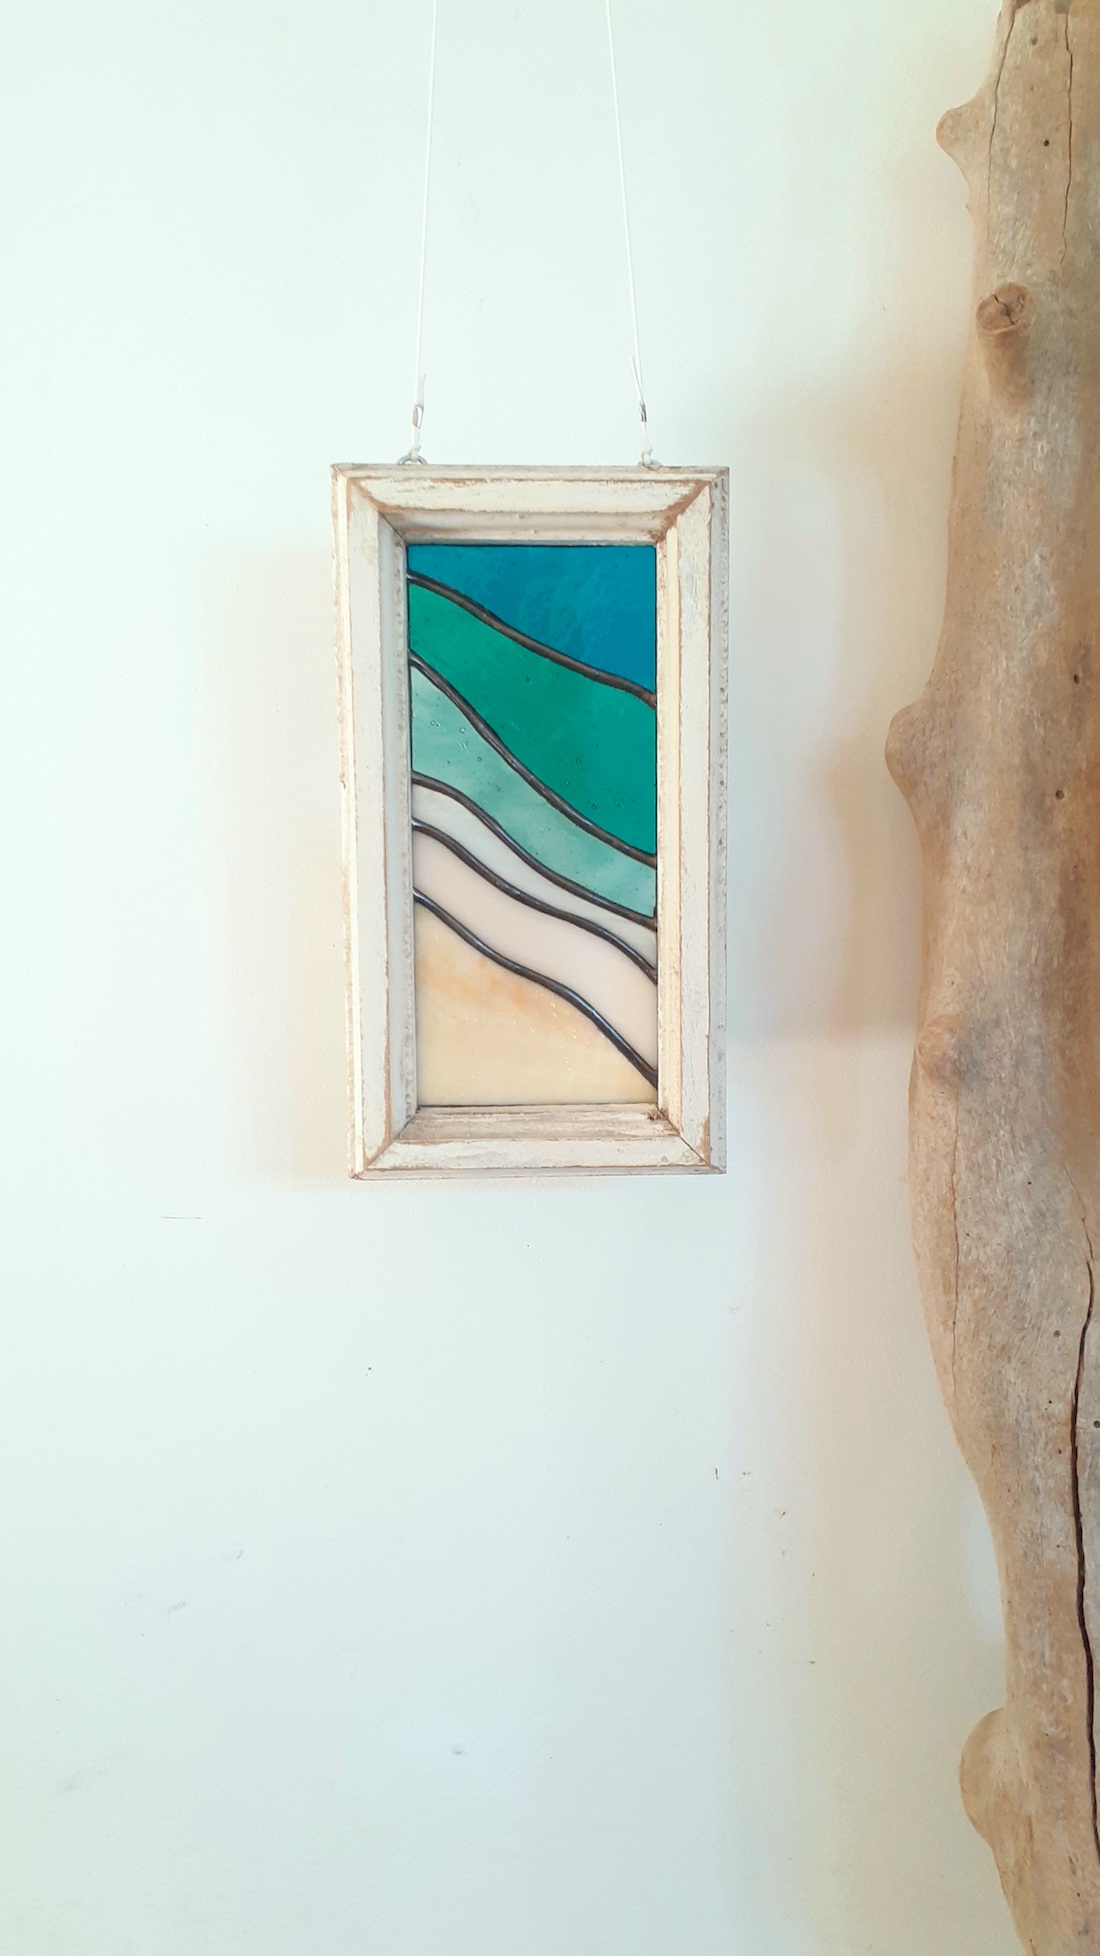 Sand and sea inspired stained glass art sun catcher